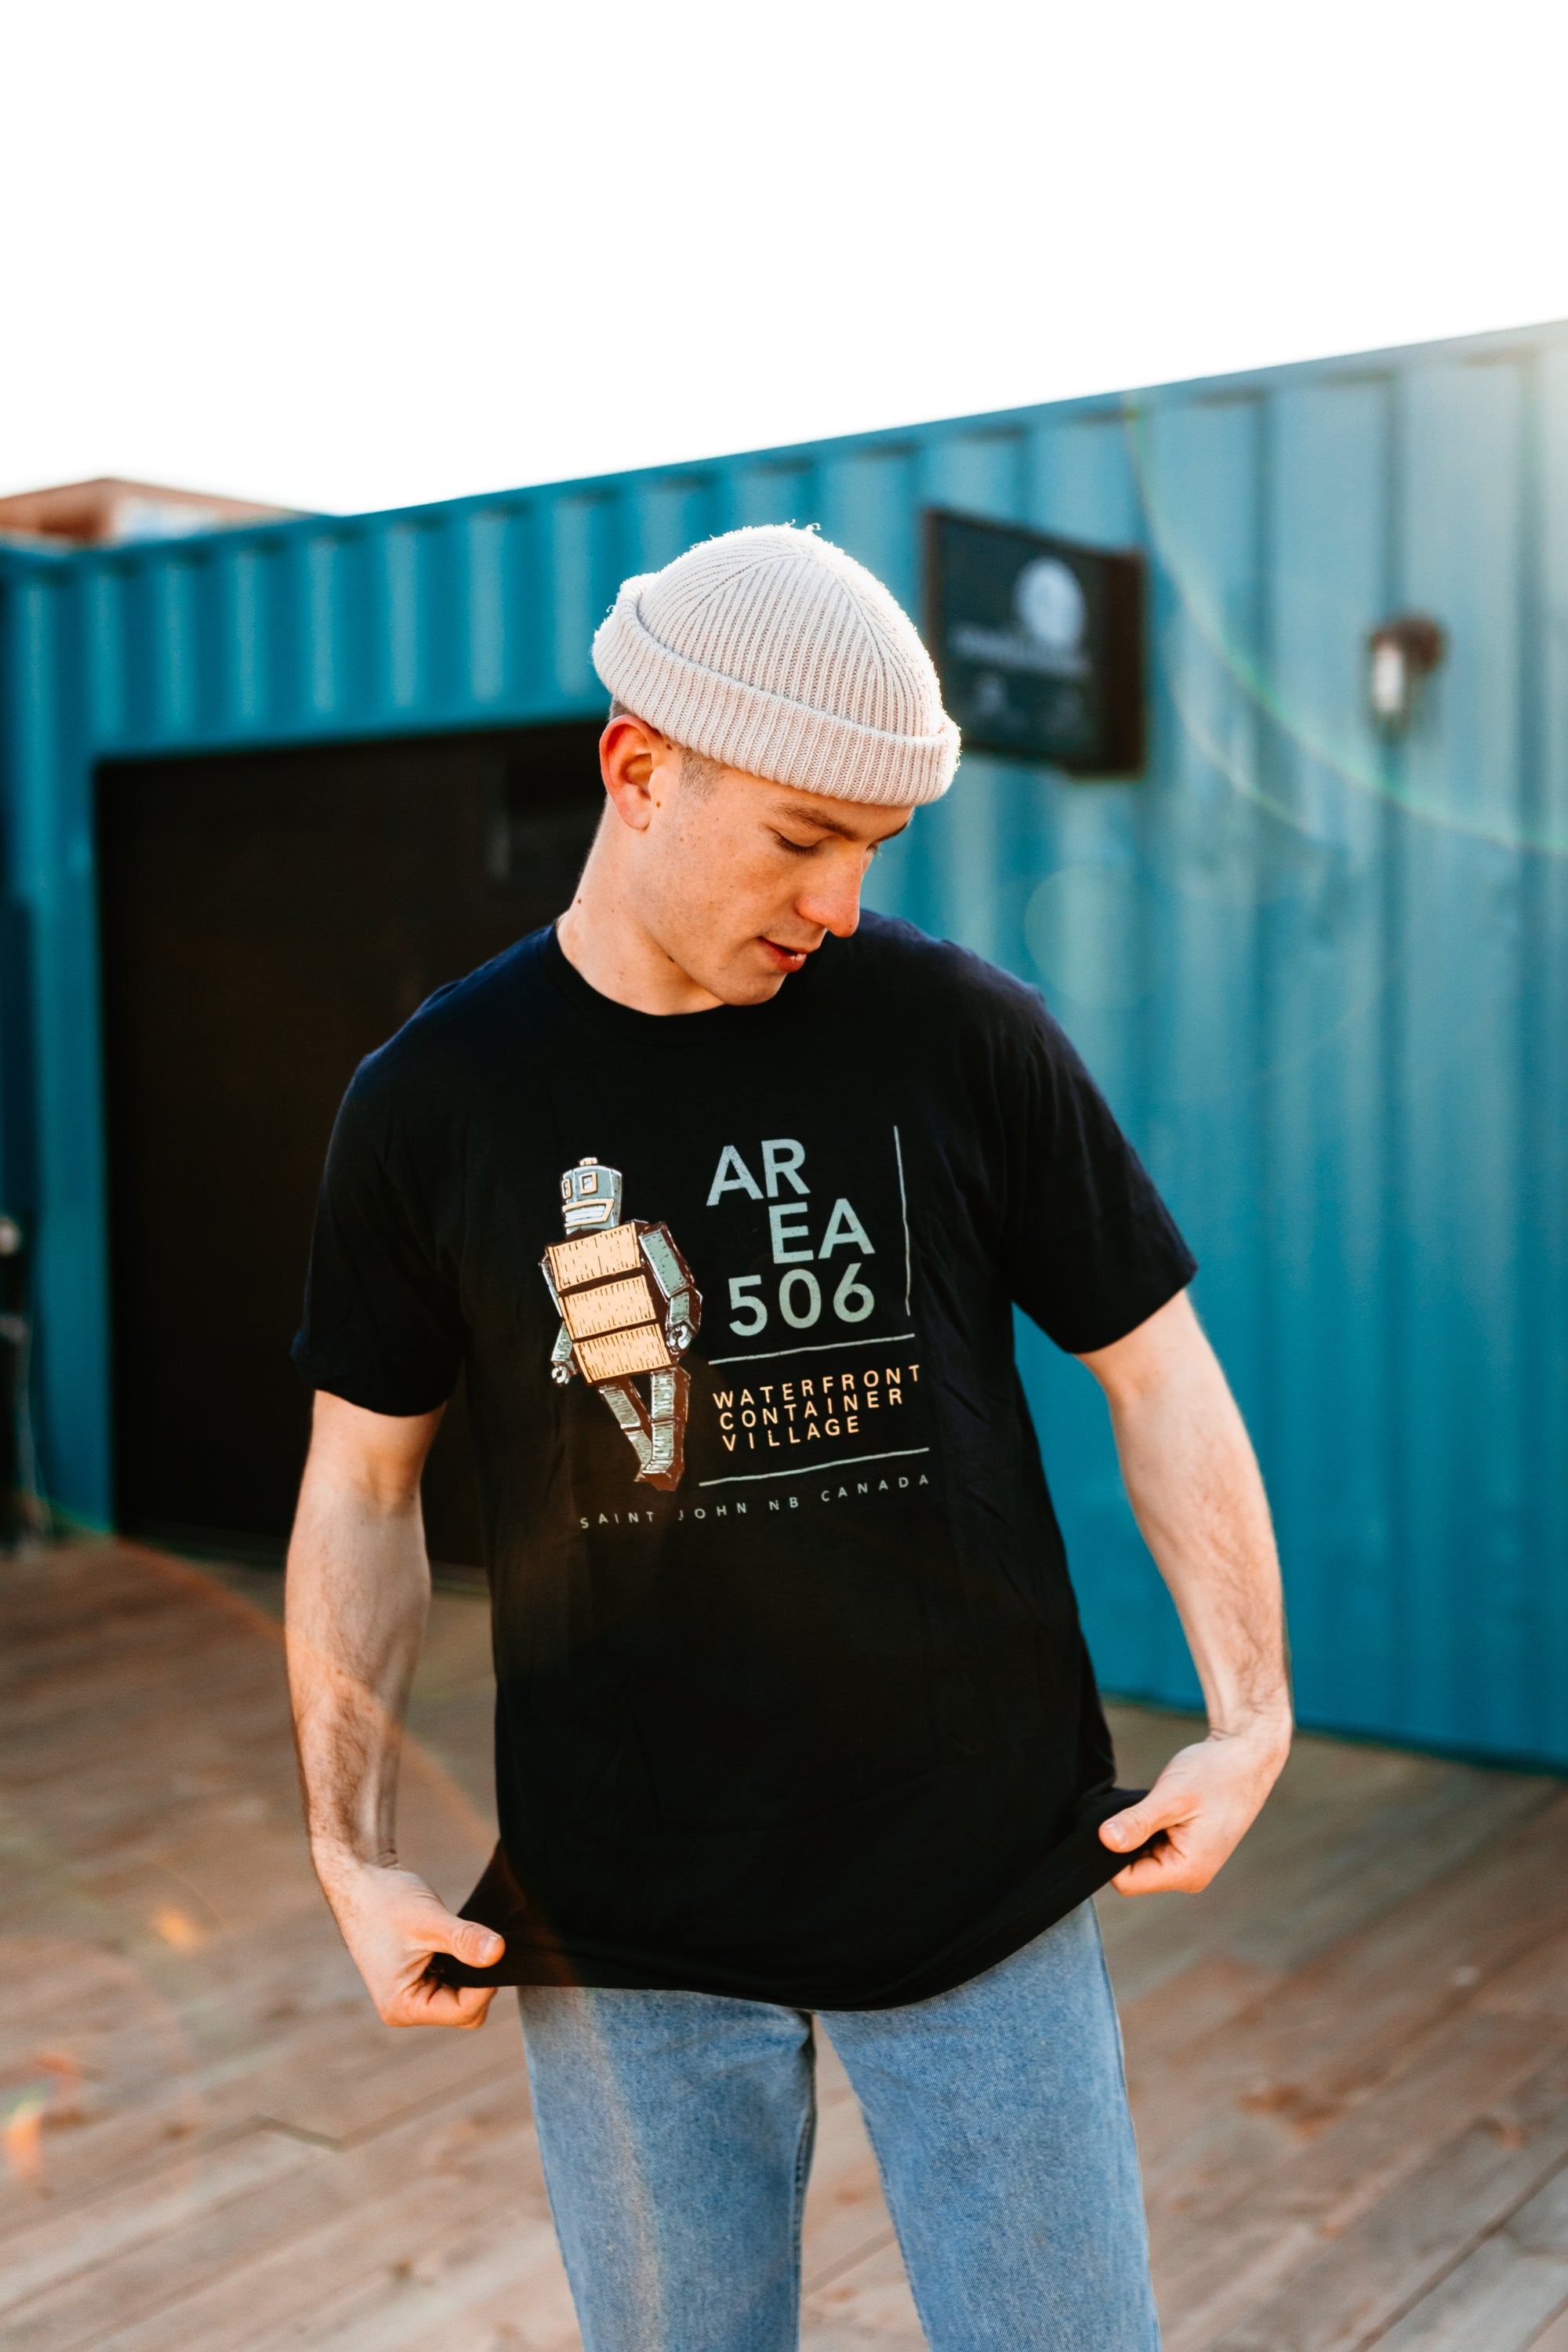 Navy blue t-shirt. Robot Mascot/AREA 506 Waterfront Container Village, Saint John NB Canada text on the front.